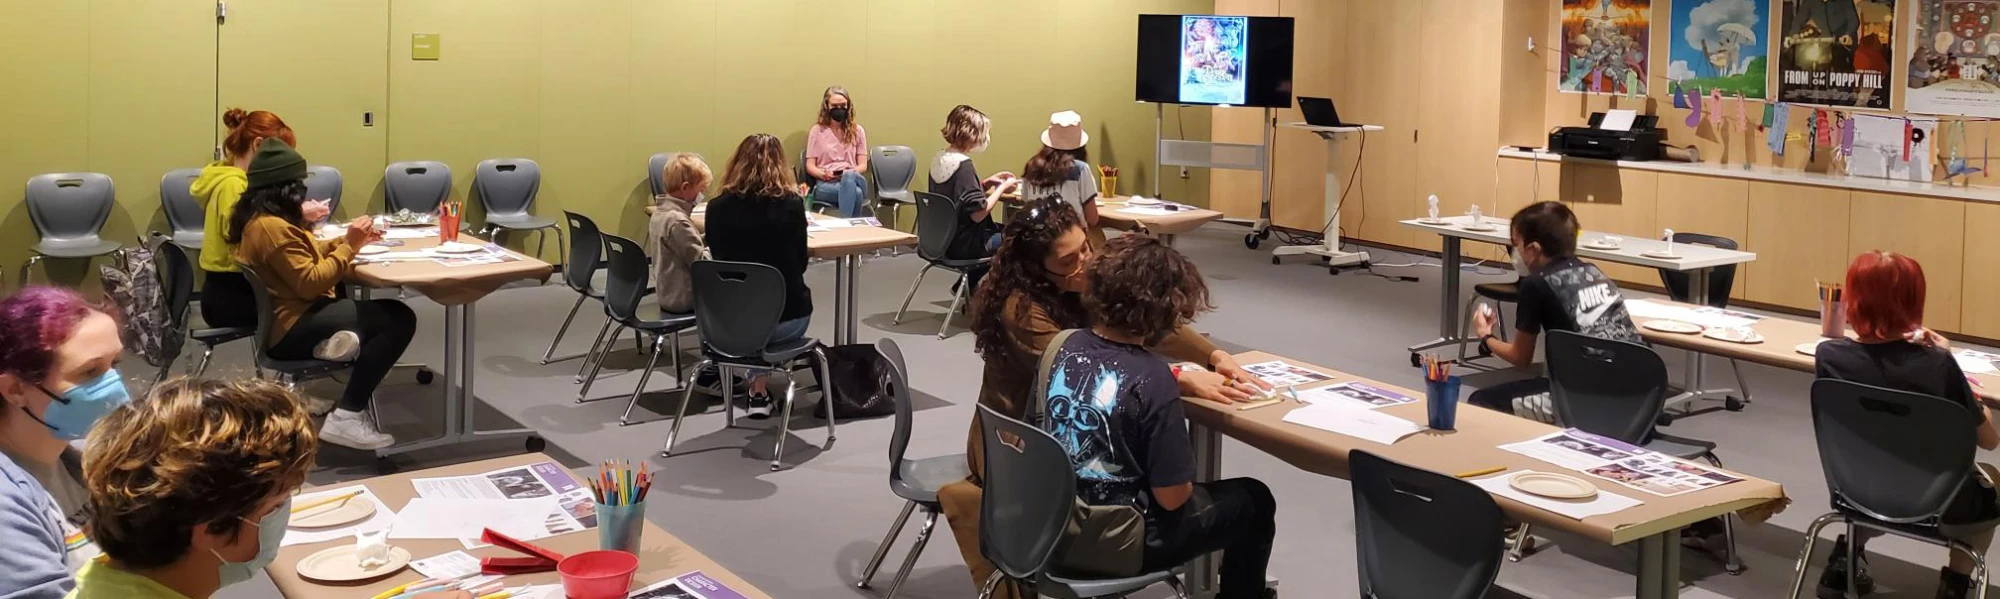 Workshop taking place in the Shirley Temple Education Studio in the Academy Museum